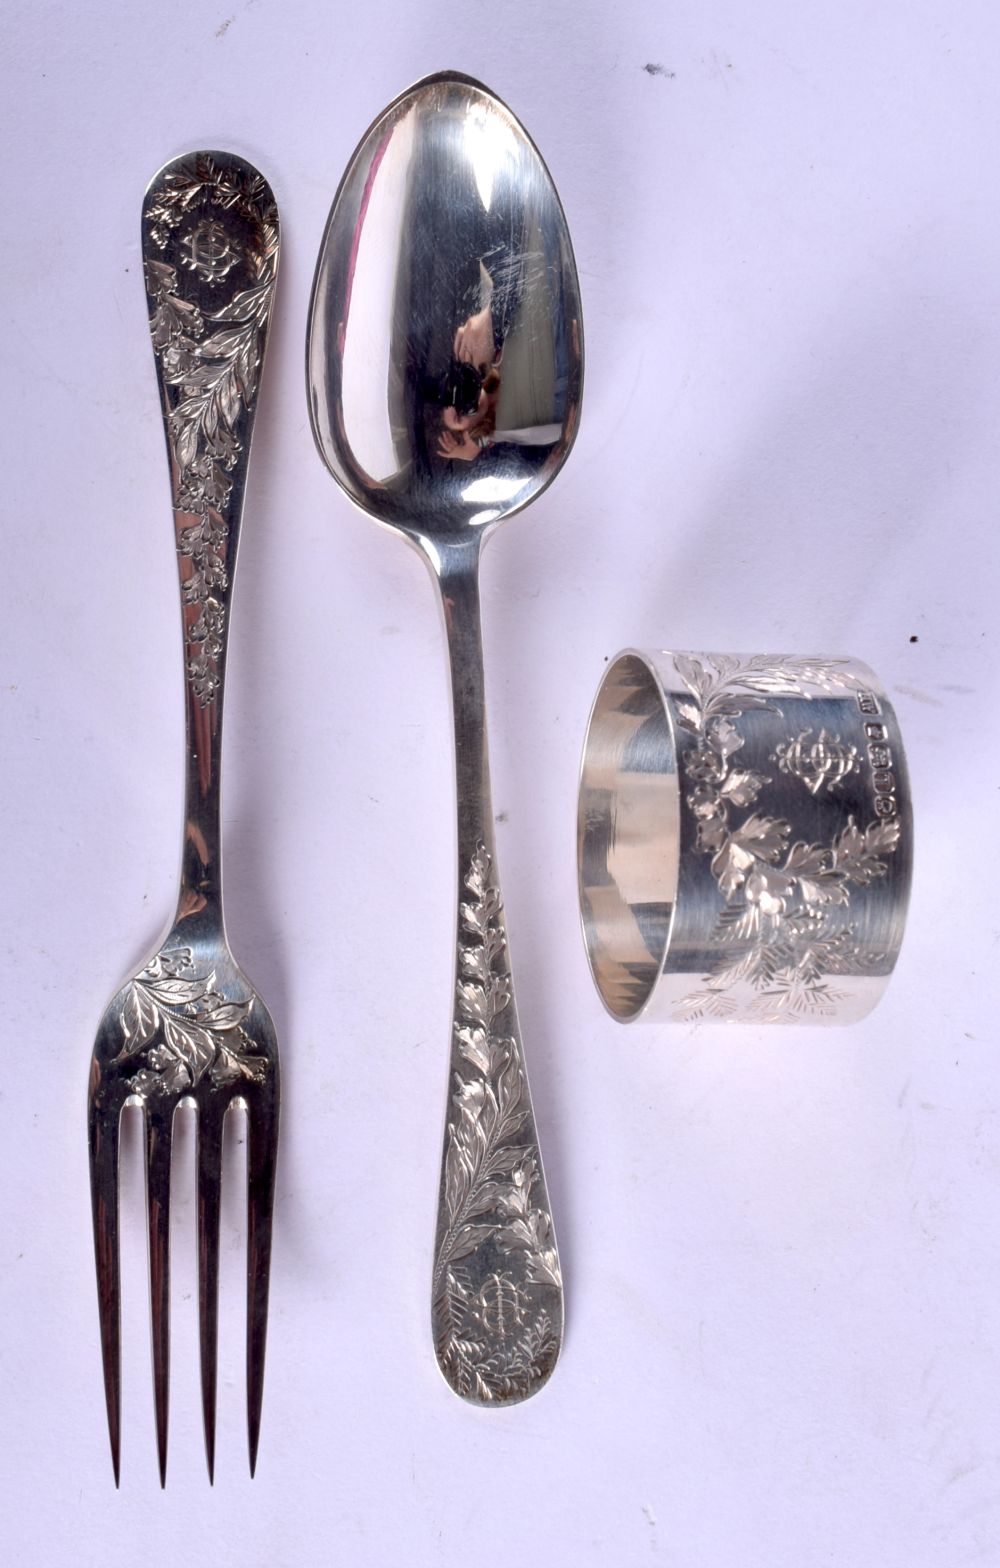 A VICTORIAN SILVER CHRISTENING SET. Sheffield 1886. 89 grams. 15 cm long. (3) - Image 2 of 4